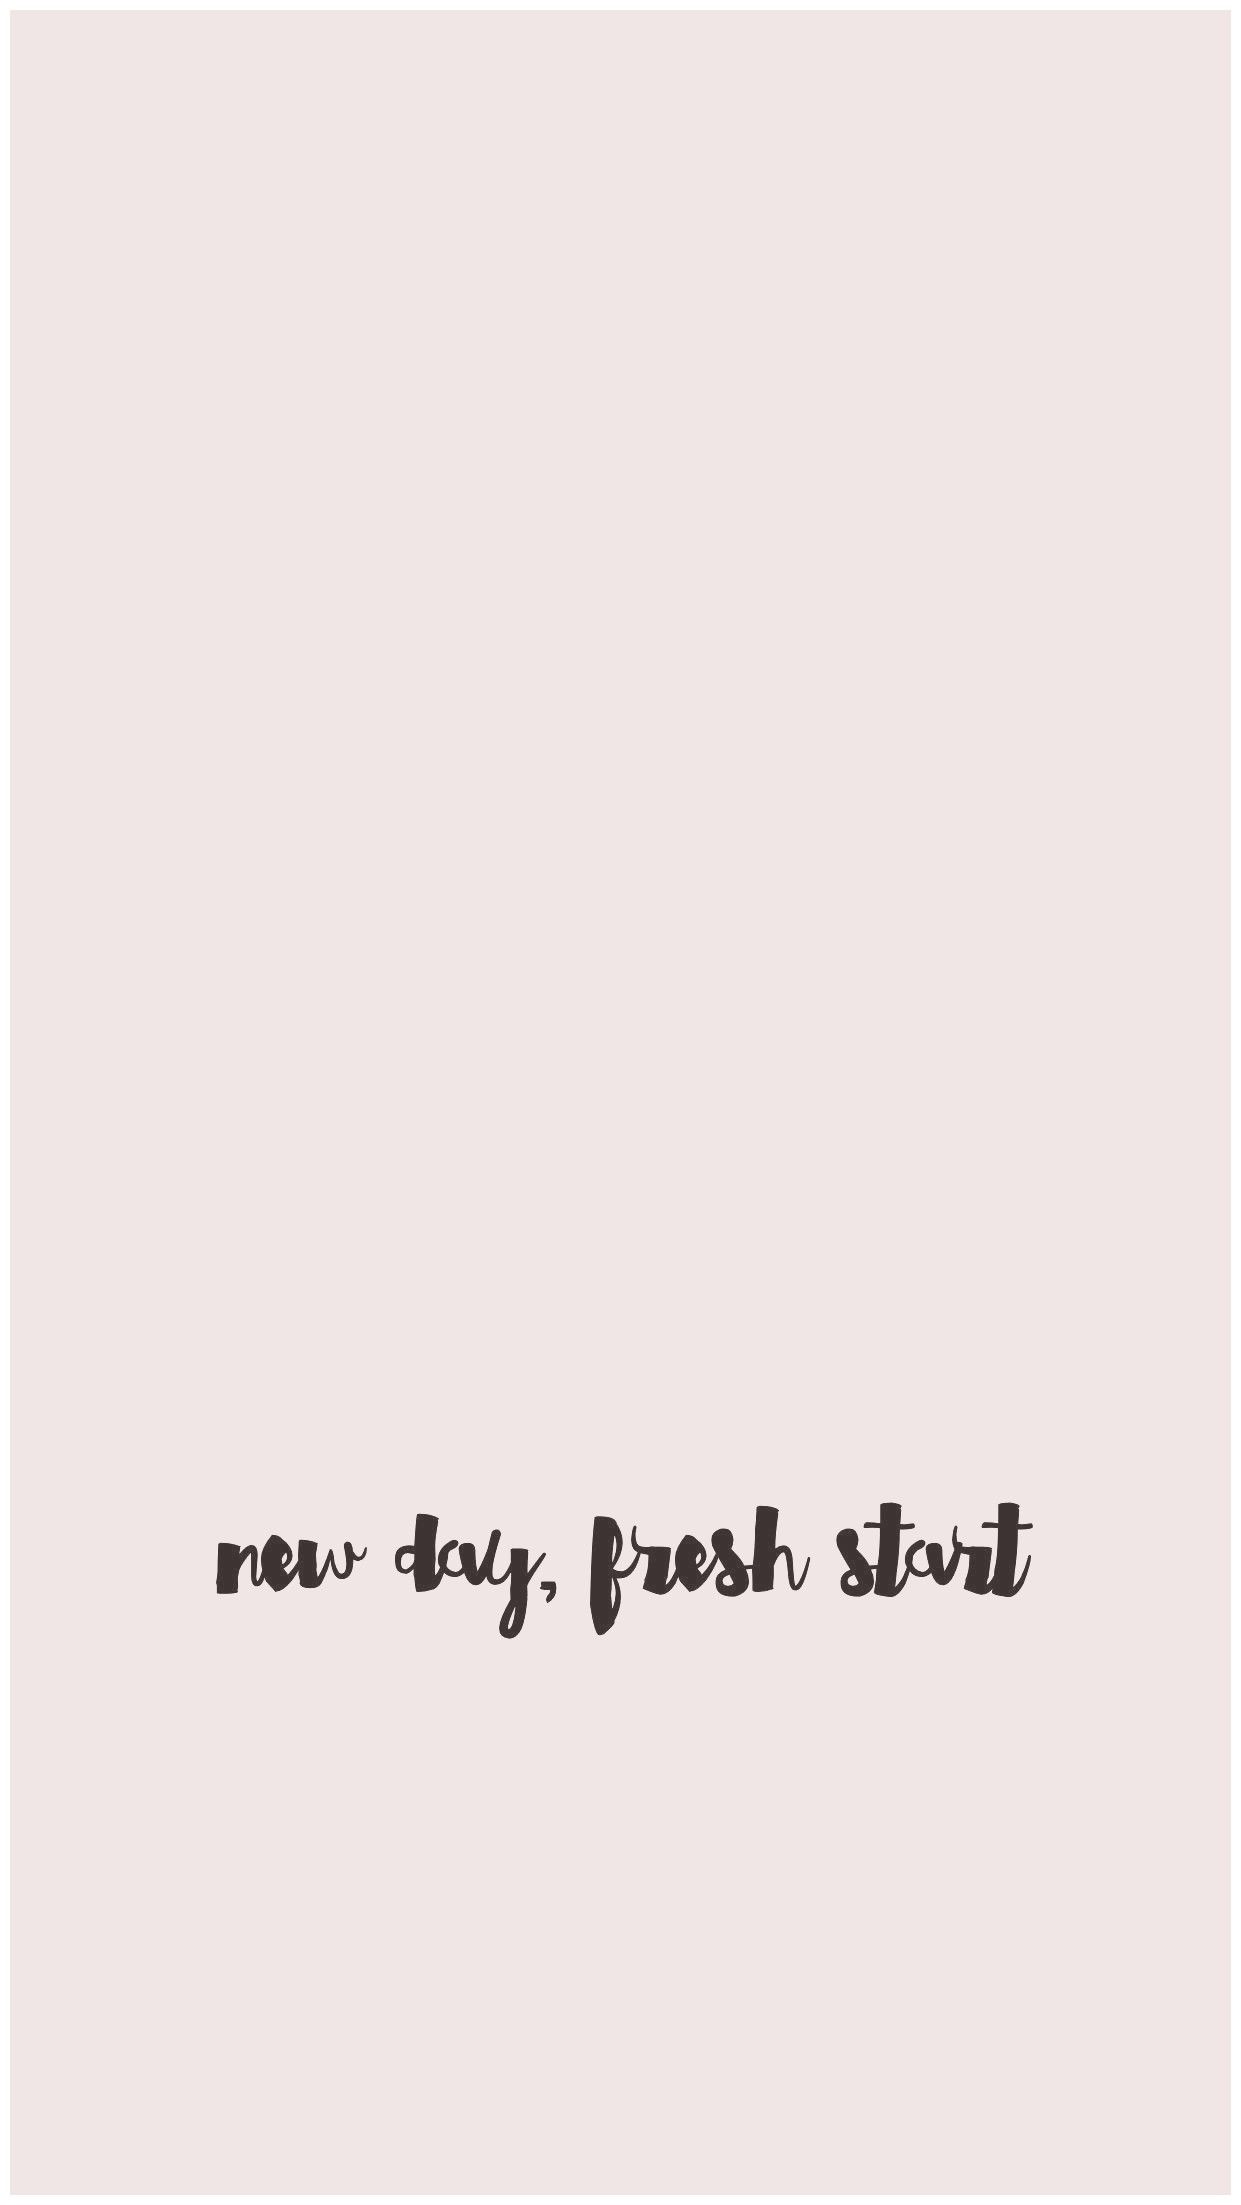 Every Day Is A Fresh Start Aesthetic Wallpapers Wallpaper Cave